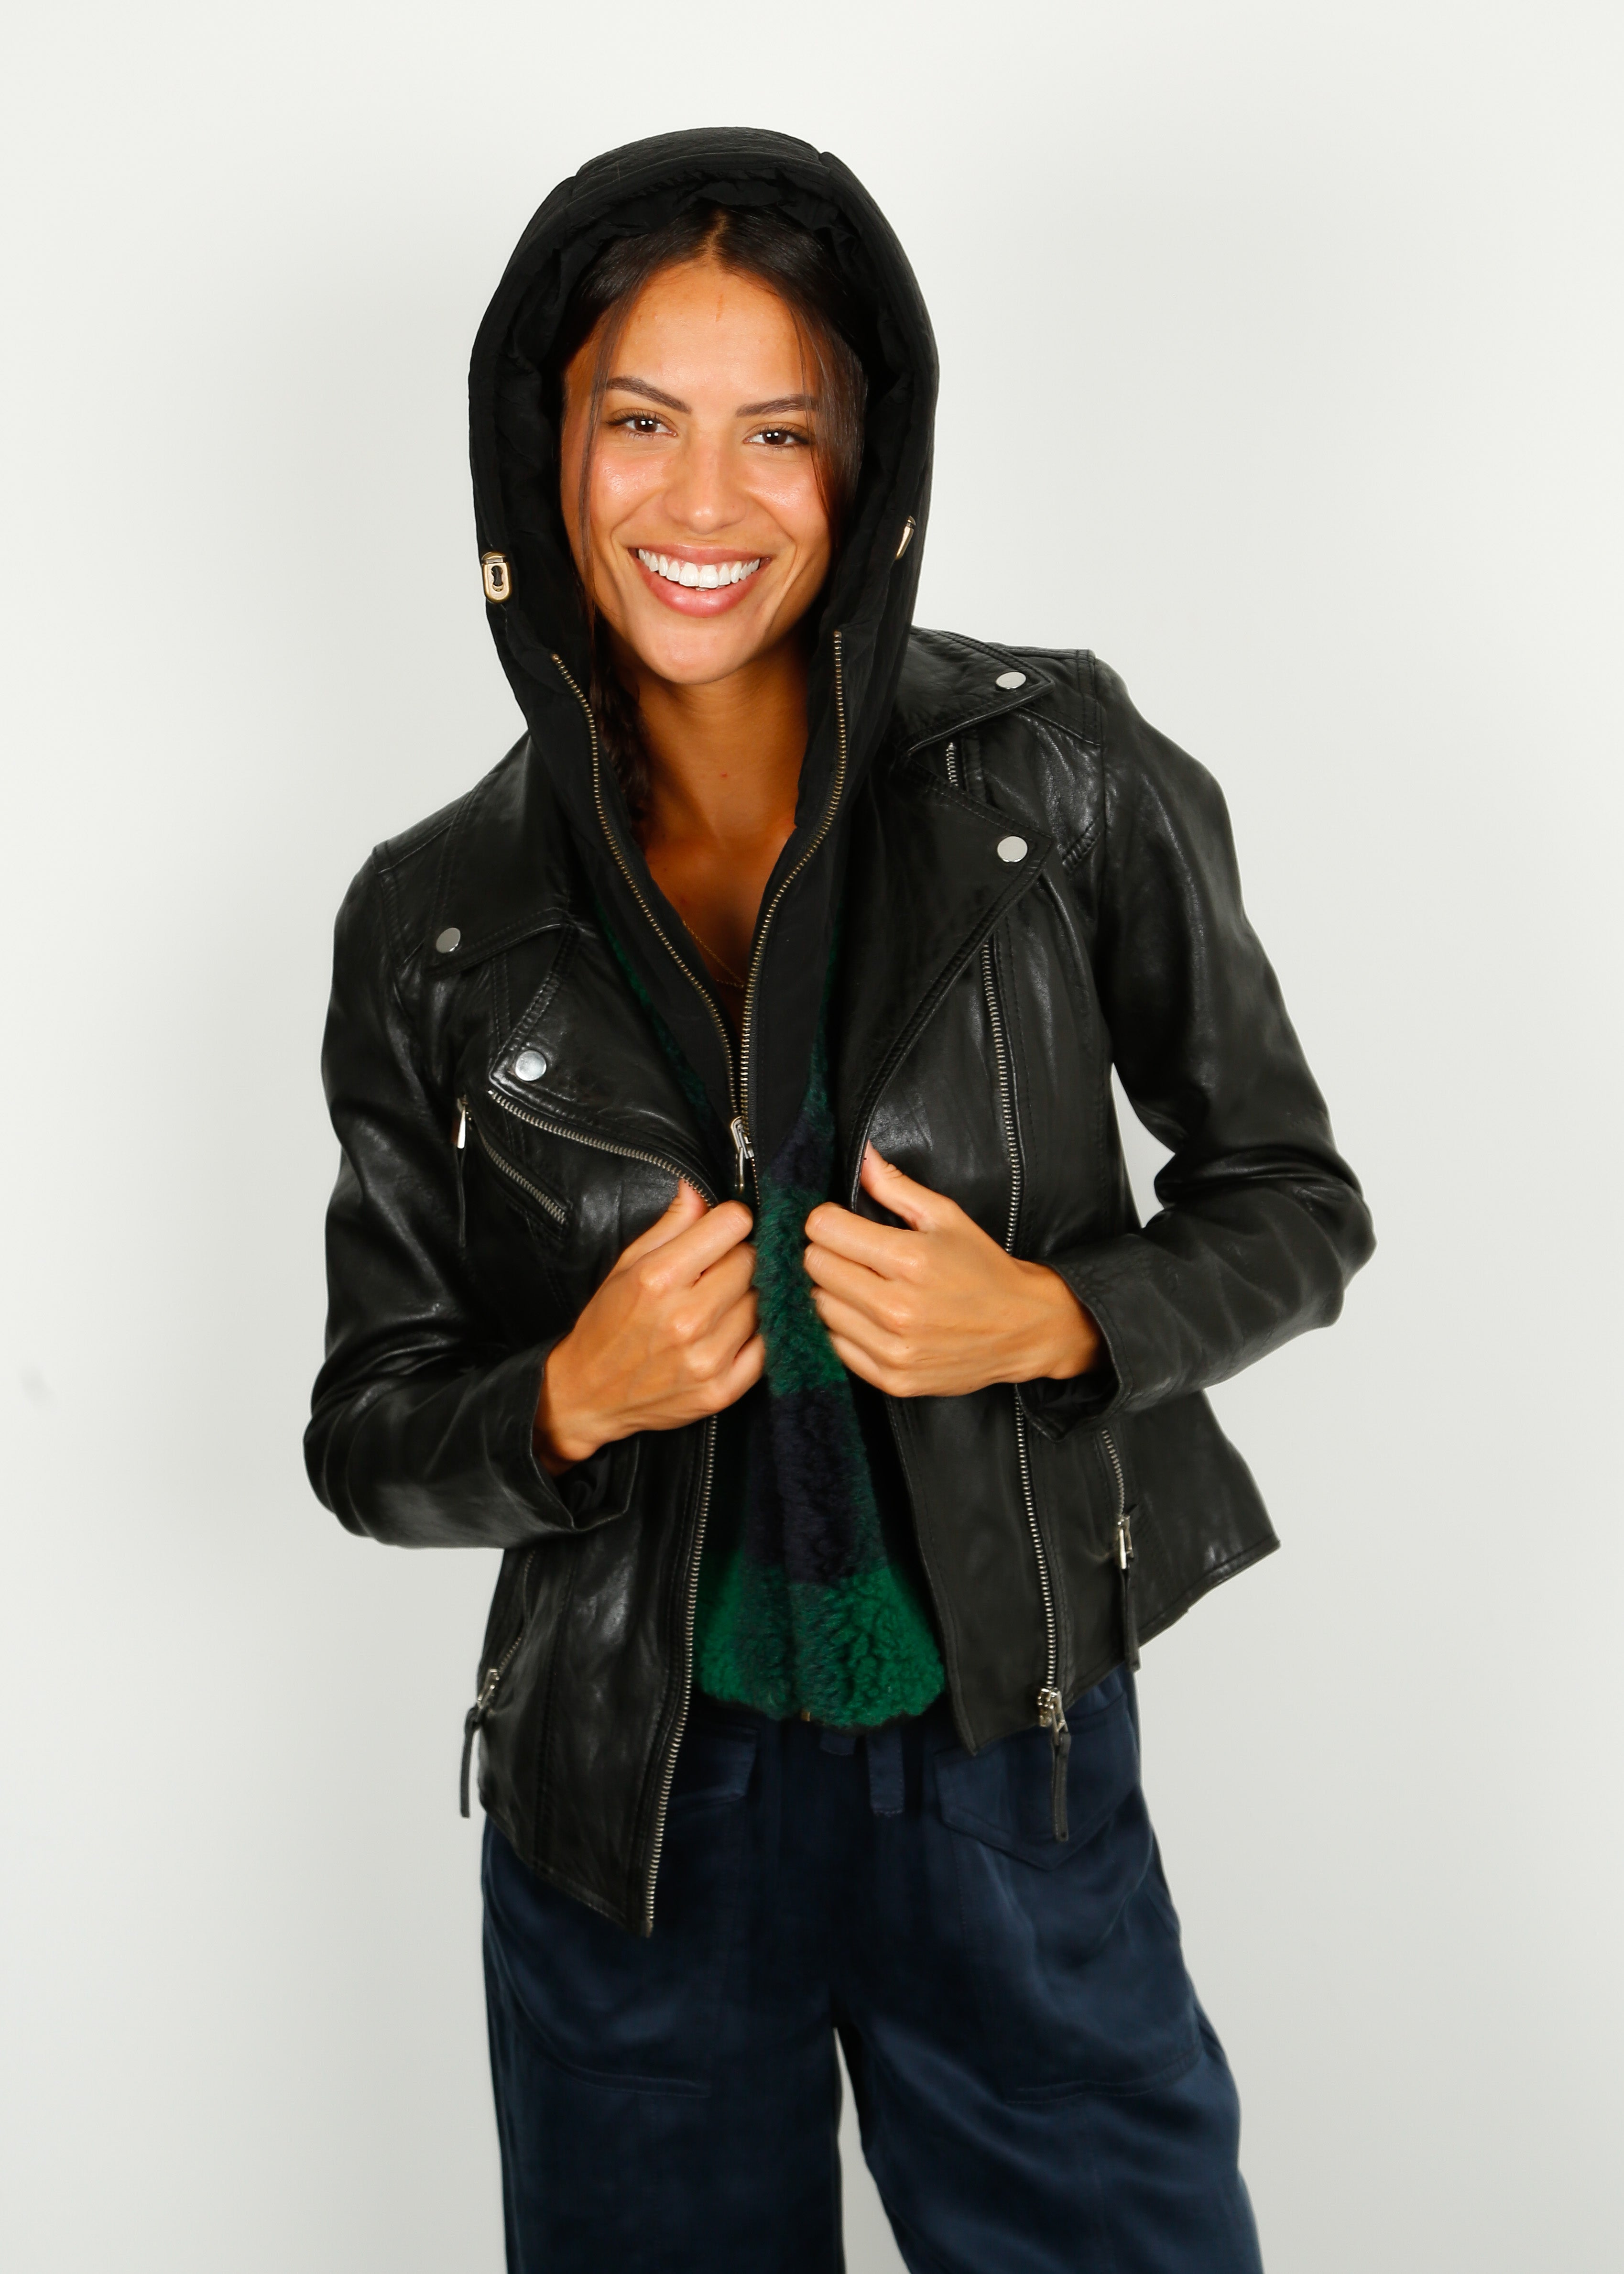 OW Clips Leather Jacket in Black